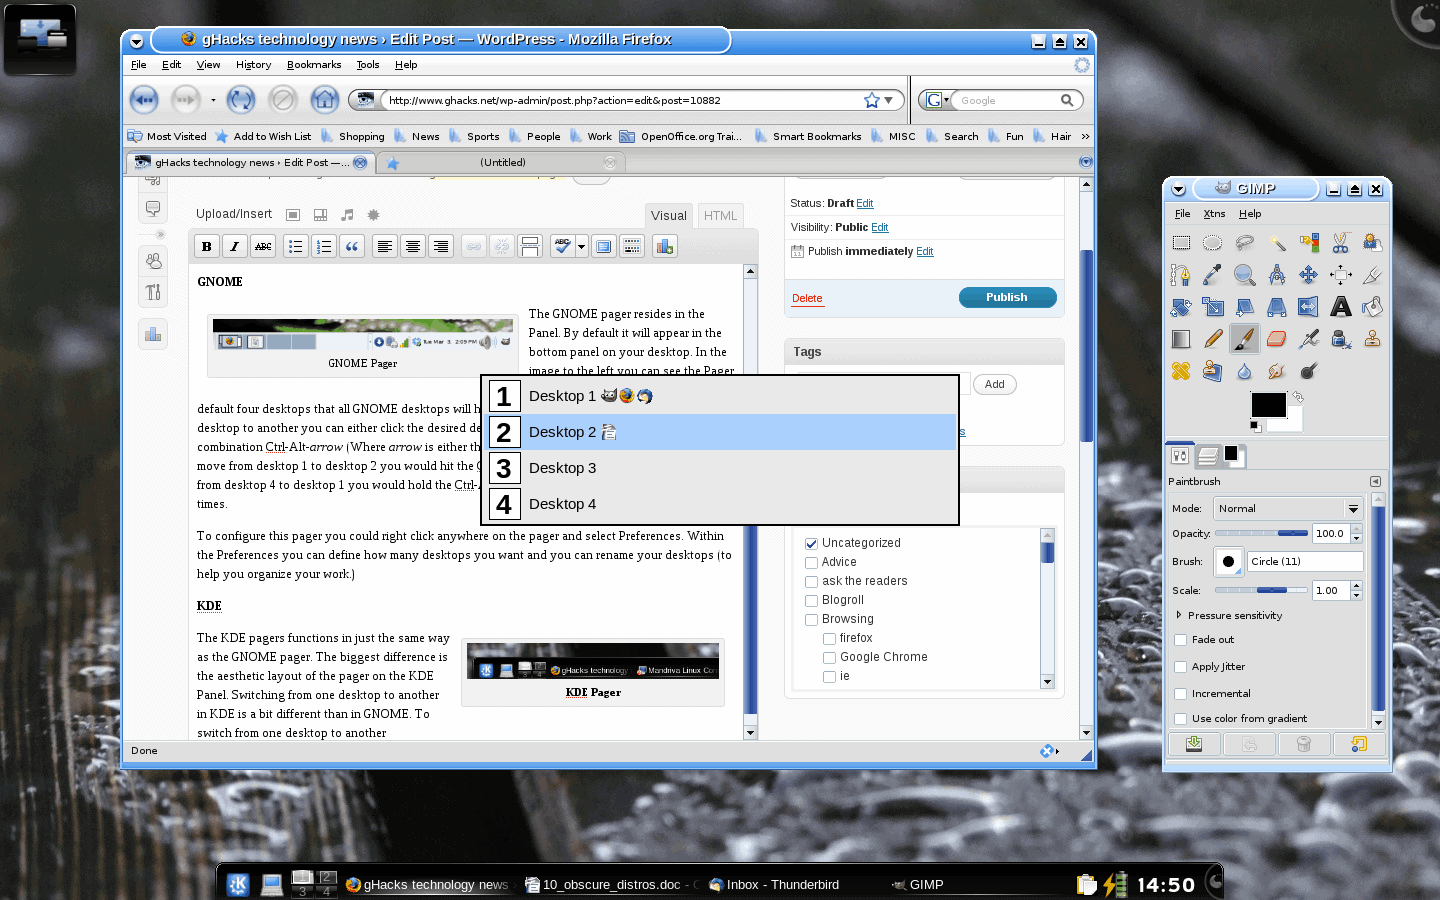 KDE Pager in Action